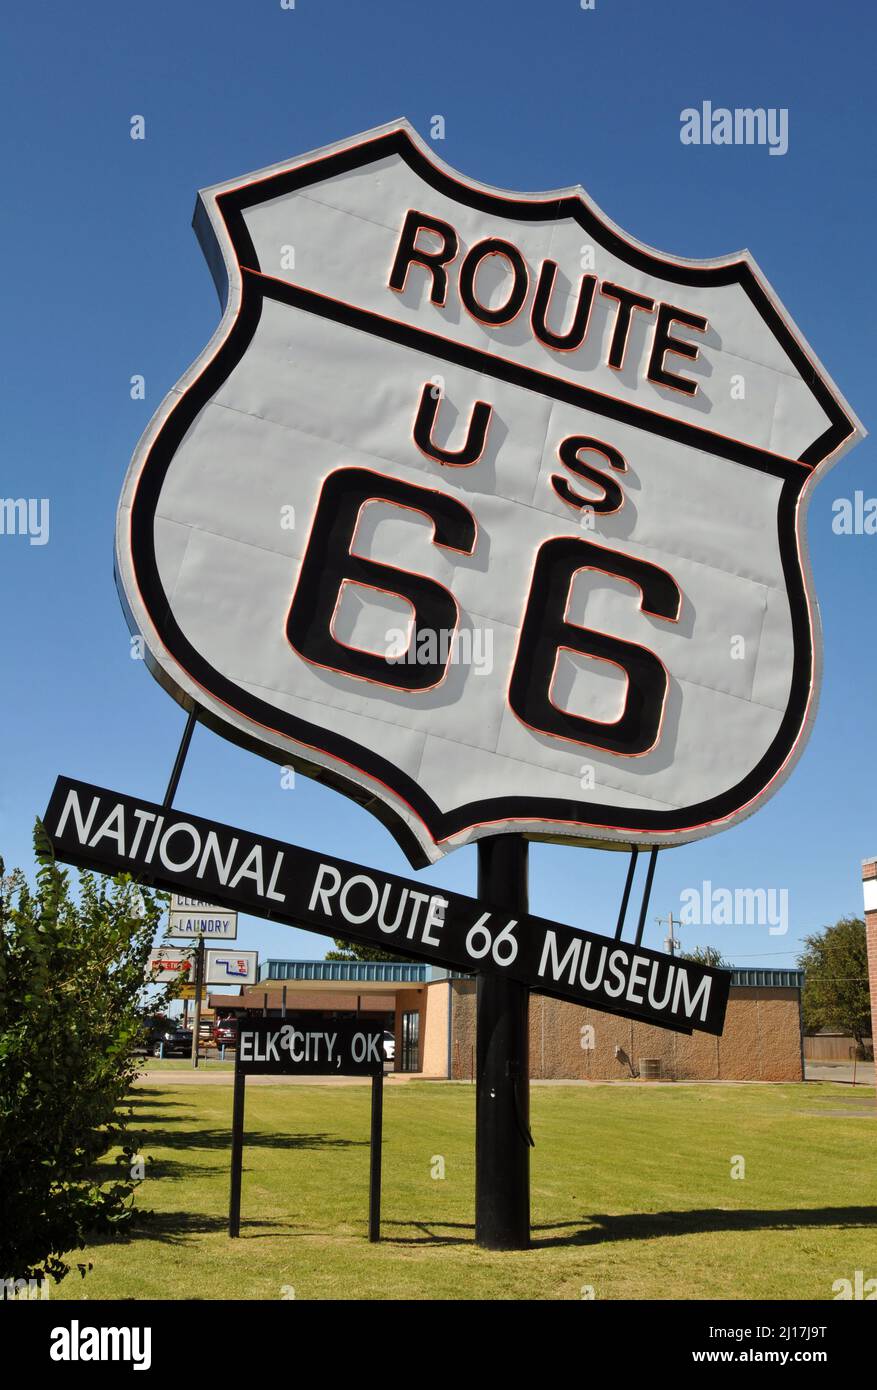 An oversized Route 66 road sign stands outside the National Route 66 Museum in Elk City, Oklahoma. Stock Photo